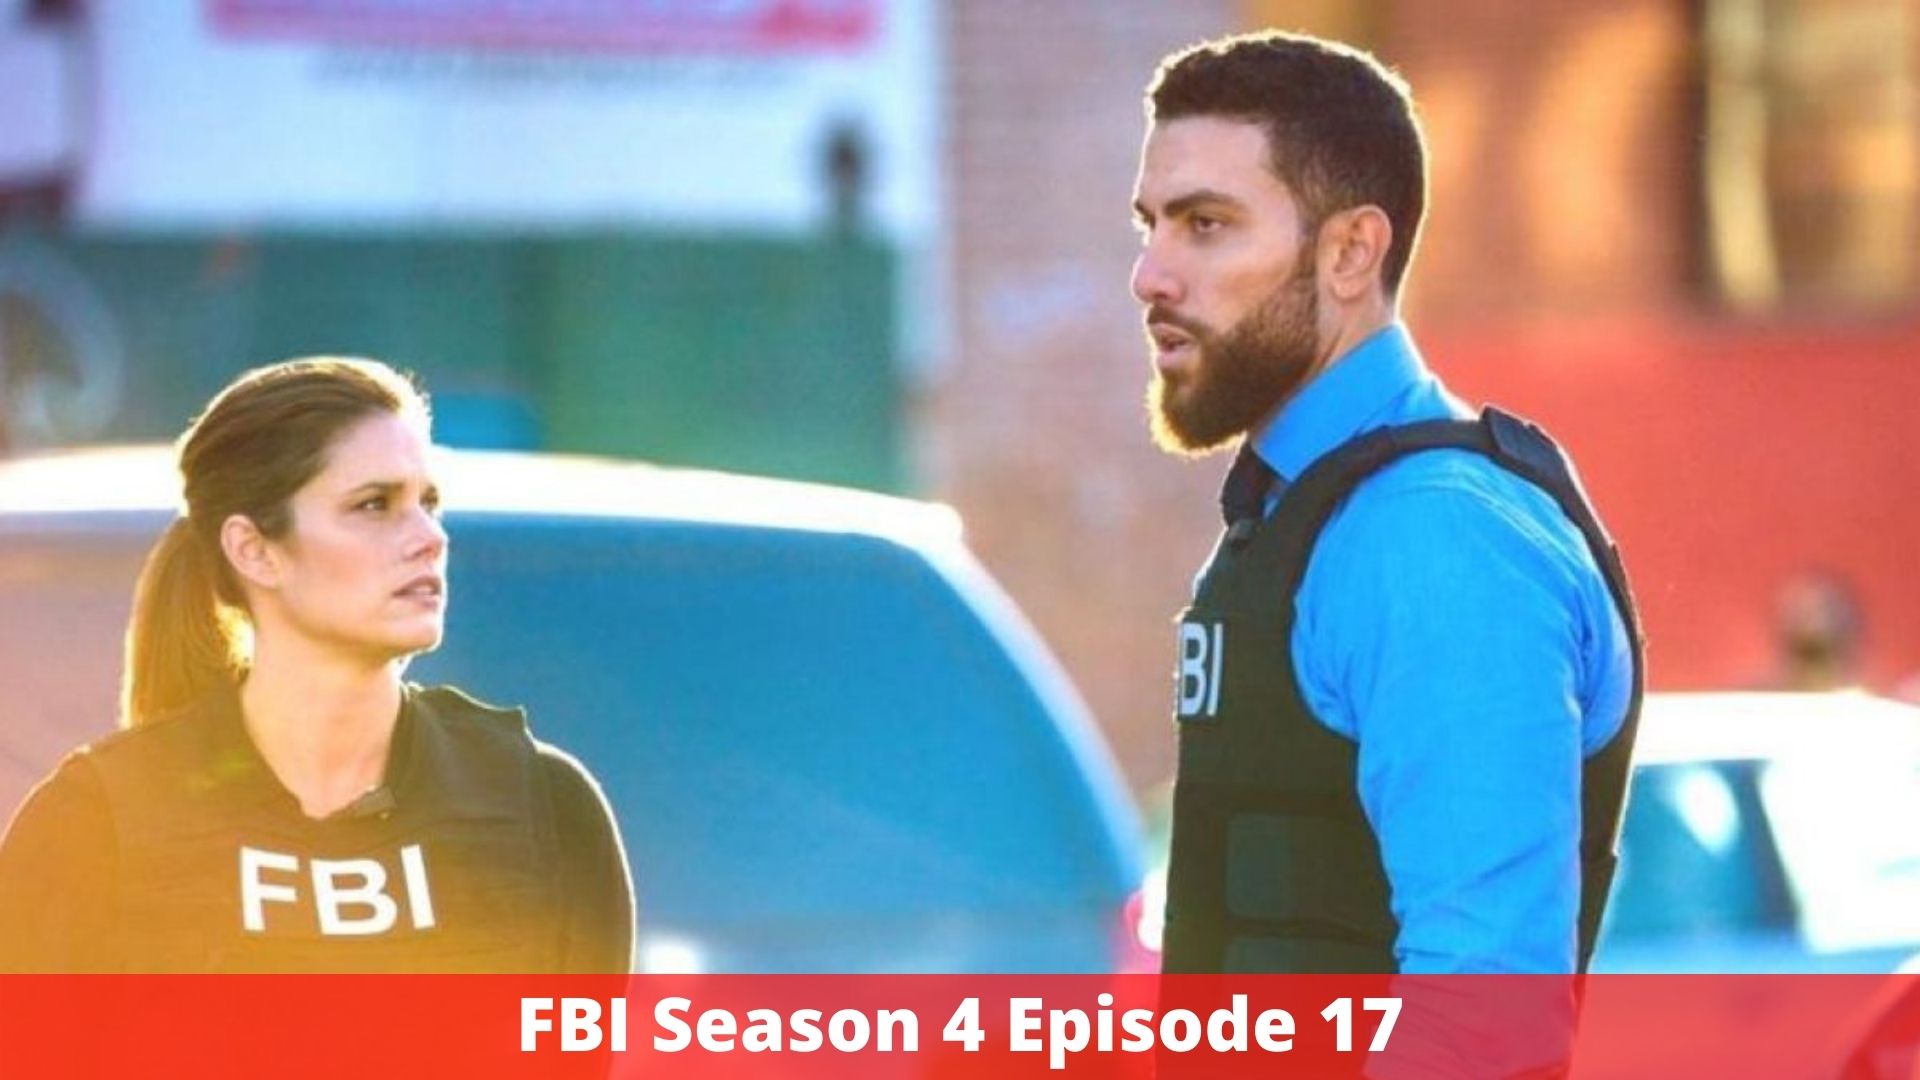 FBI Season 4 Episode 17 - Release Date, Cast, Where To Watch, And More!